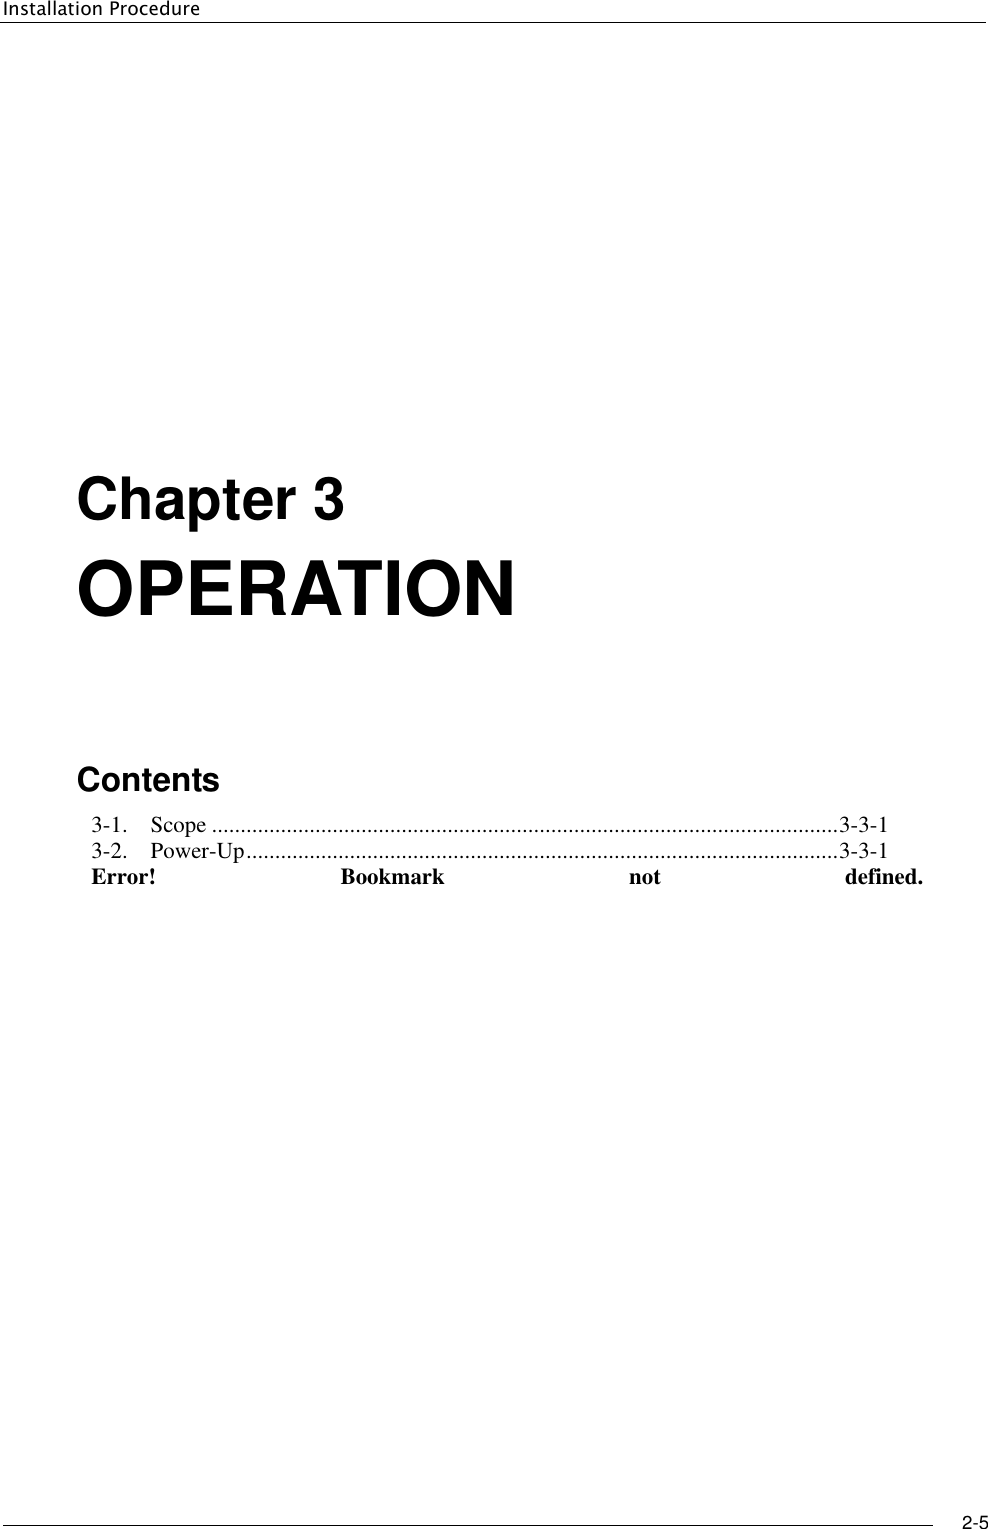 Installation Procedure     2-5           Chapter 3 OPERATION    Contents 3-1. Scope ............................................................................................................. 3-3-1 3-2. Power-Up ....................................................................................................... 3-3-1 Error!  Bookmark  not  defined.